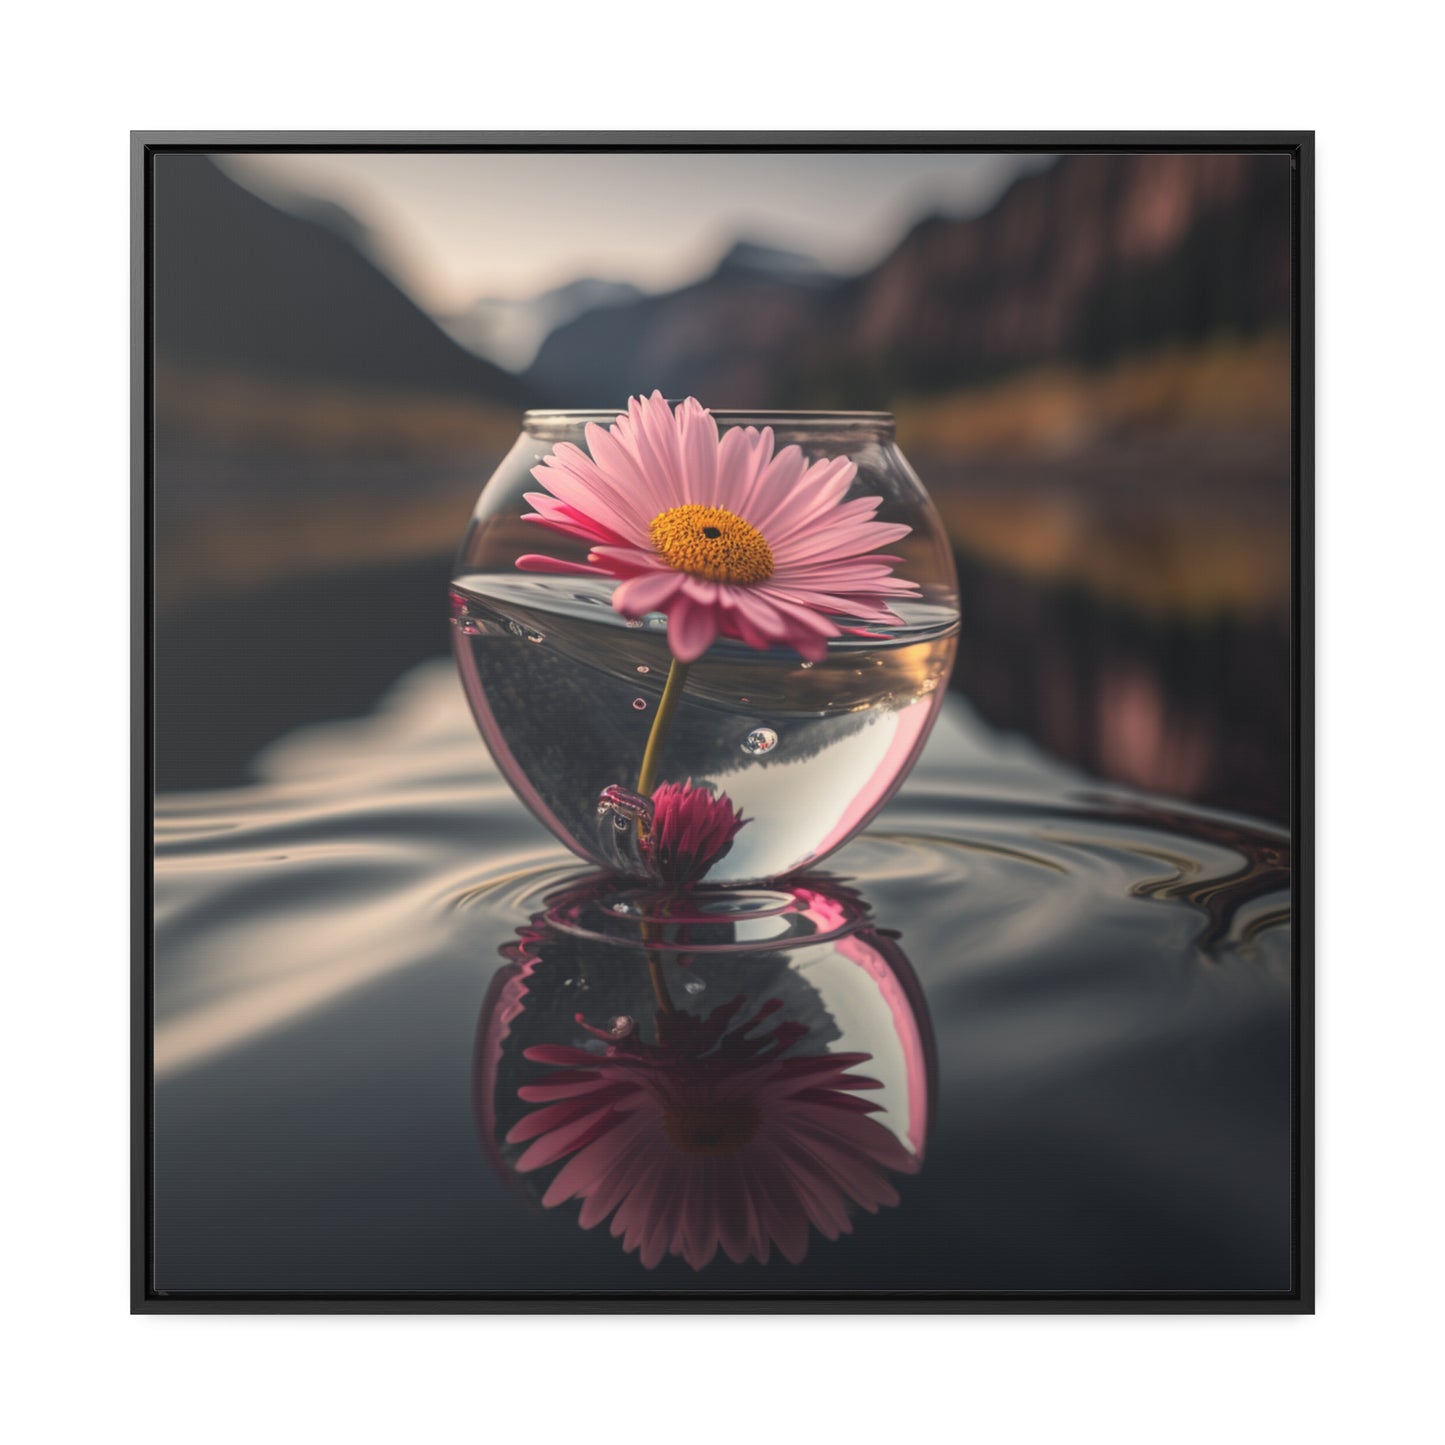 Gallery Canvas Wraps, Square Frame Daisy in a vase 3